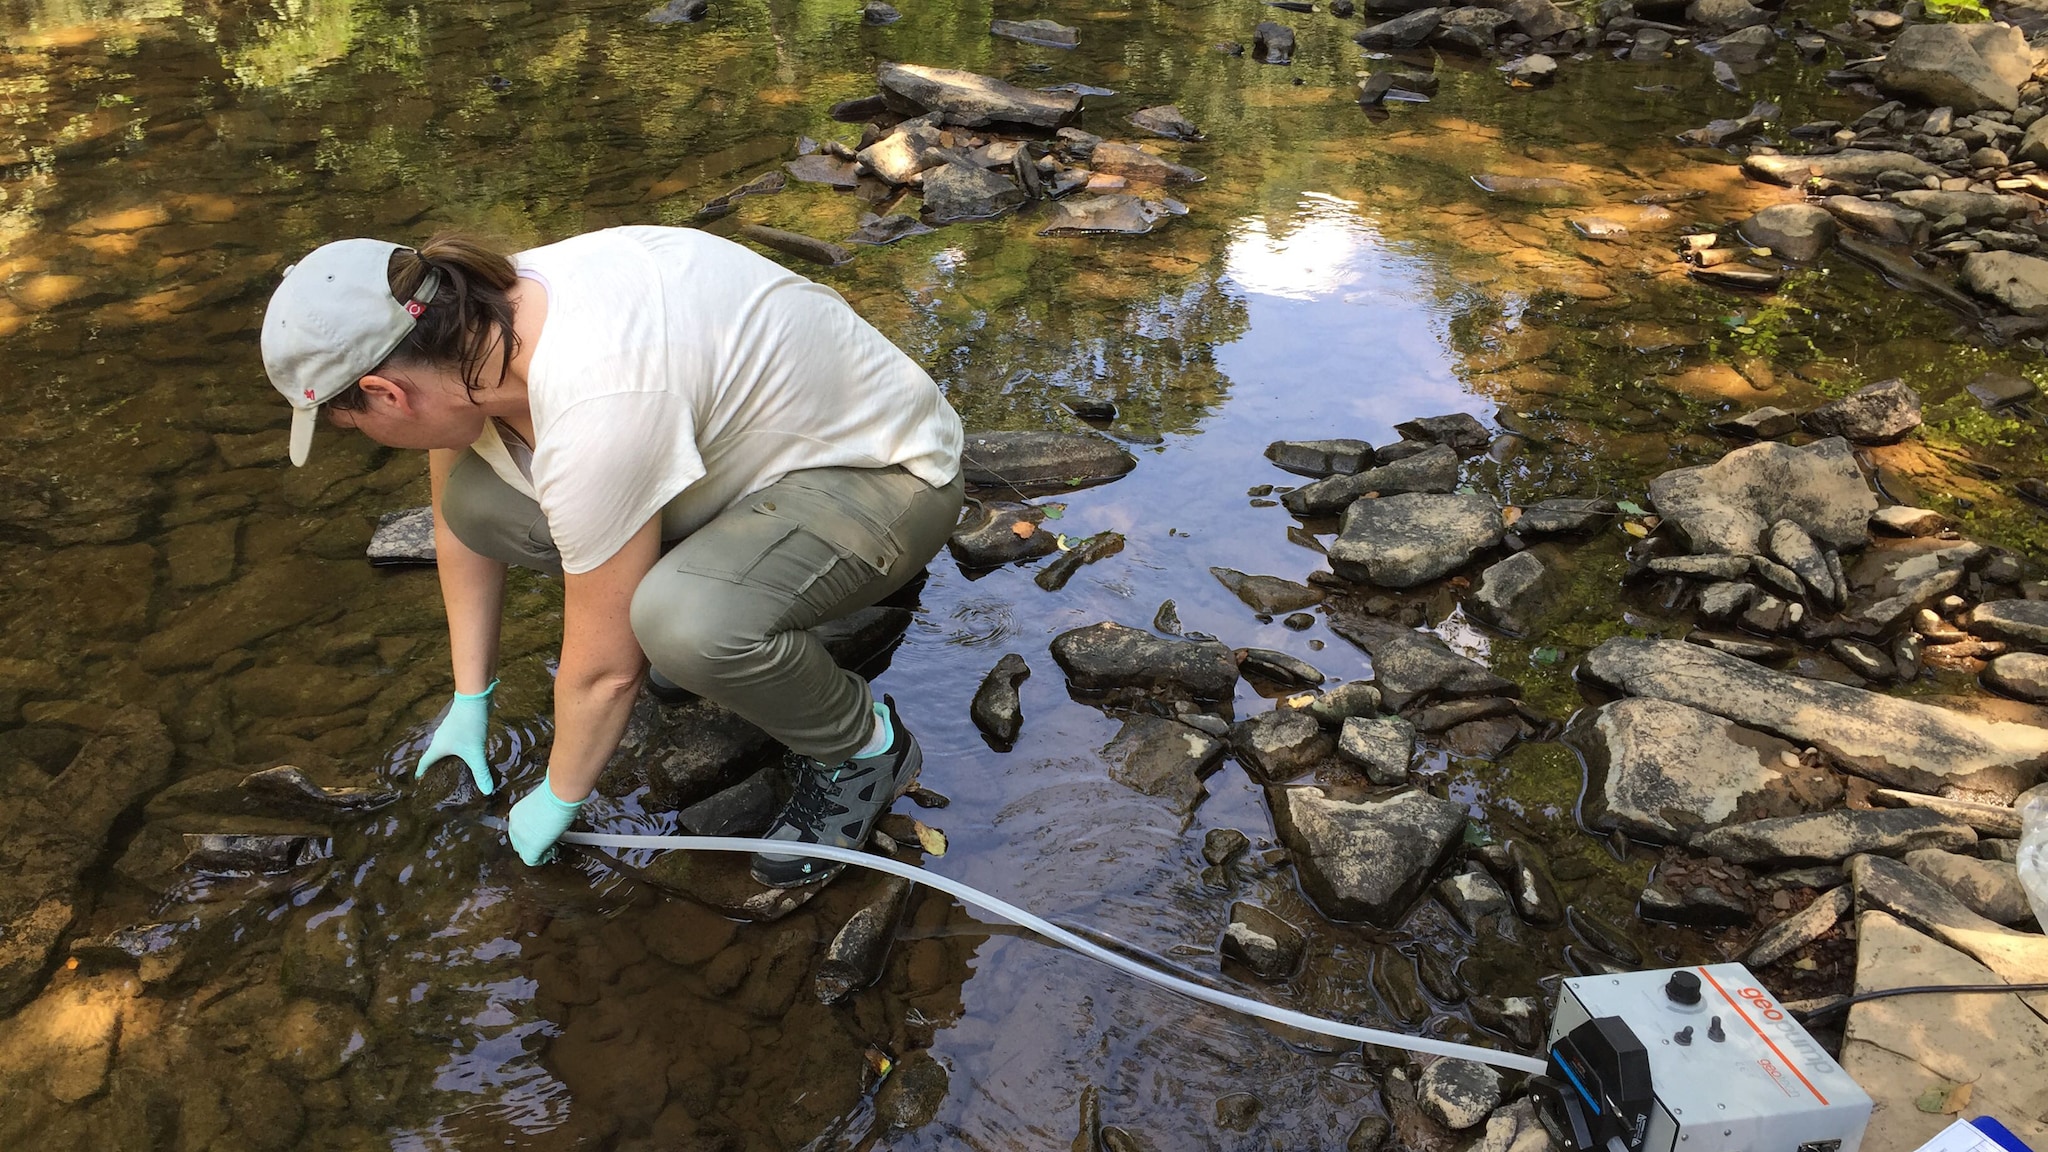 LLS fellow conducts water sampling during Epi-Aid investigation.